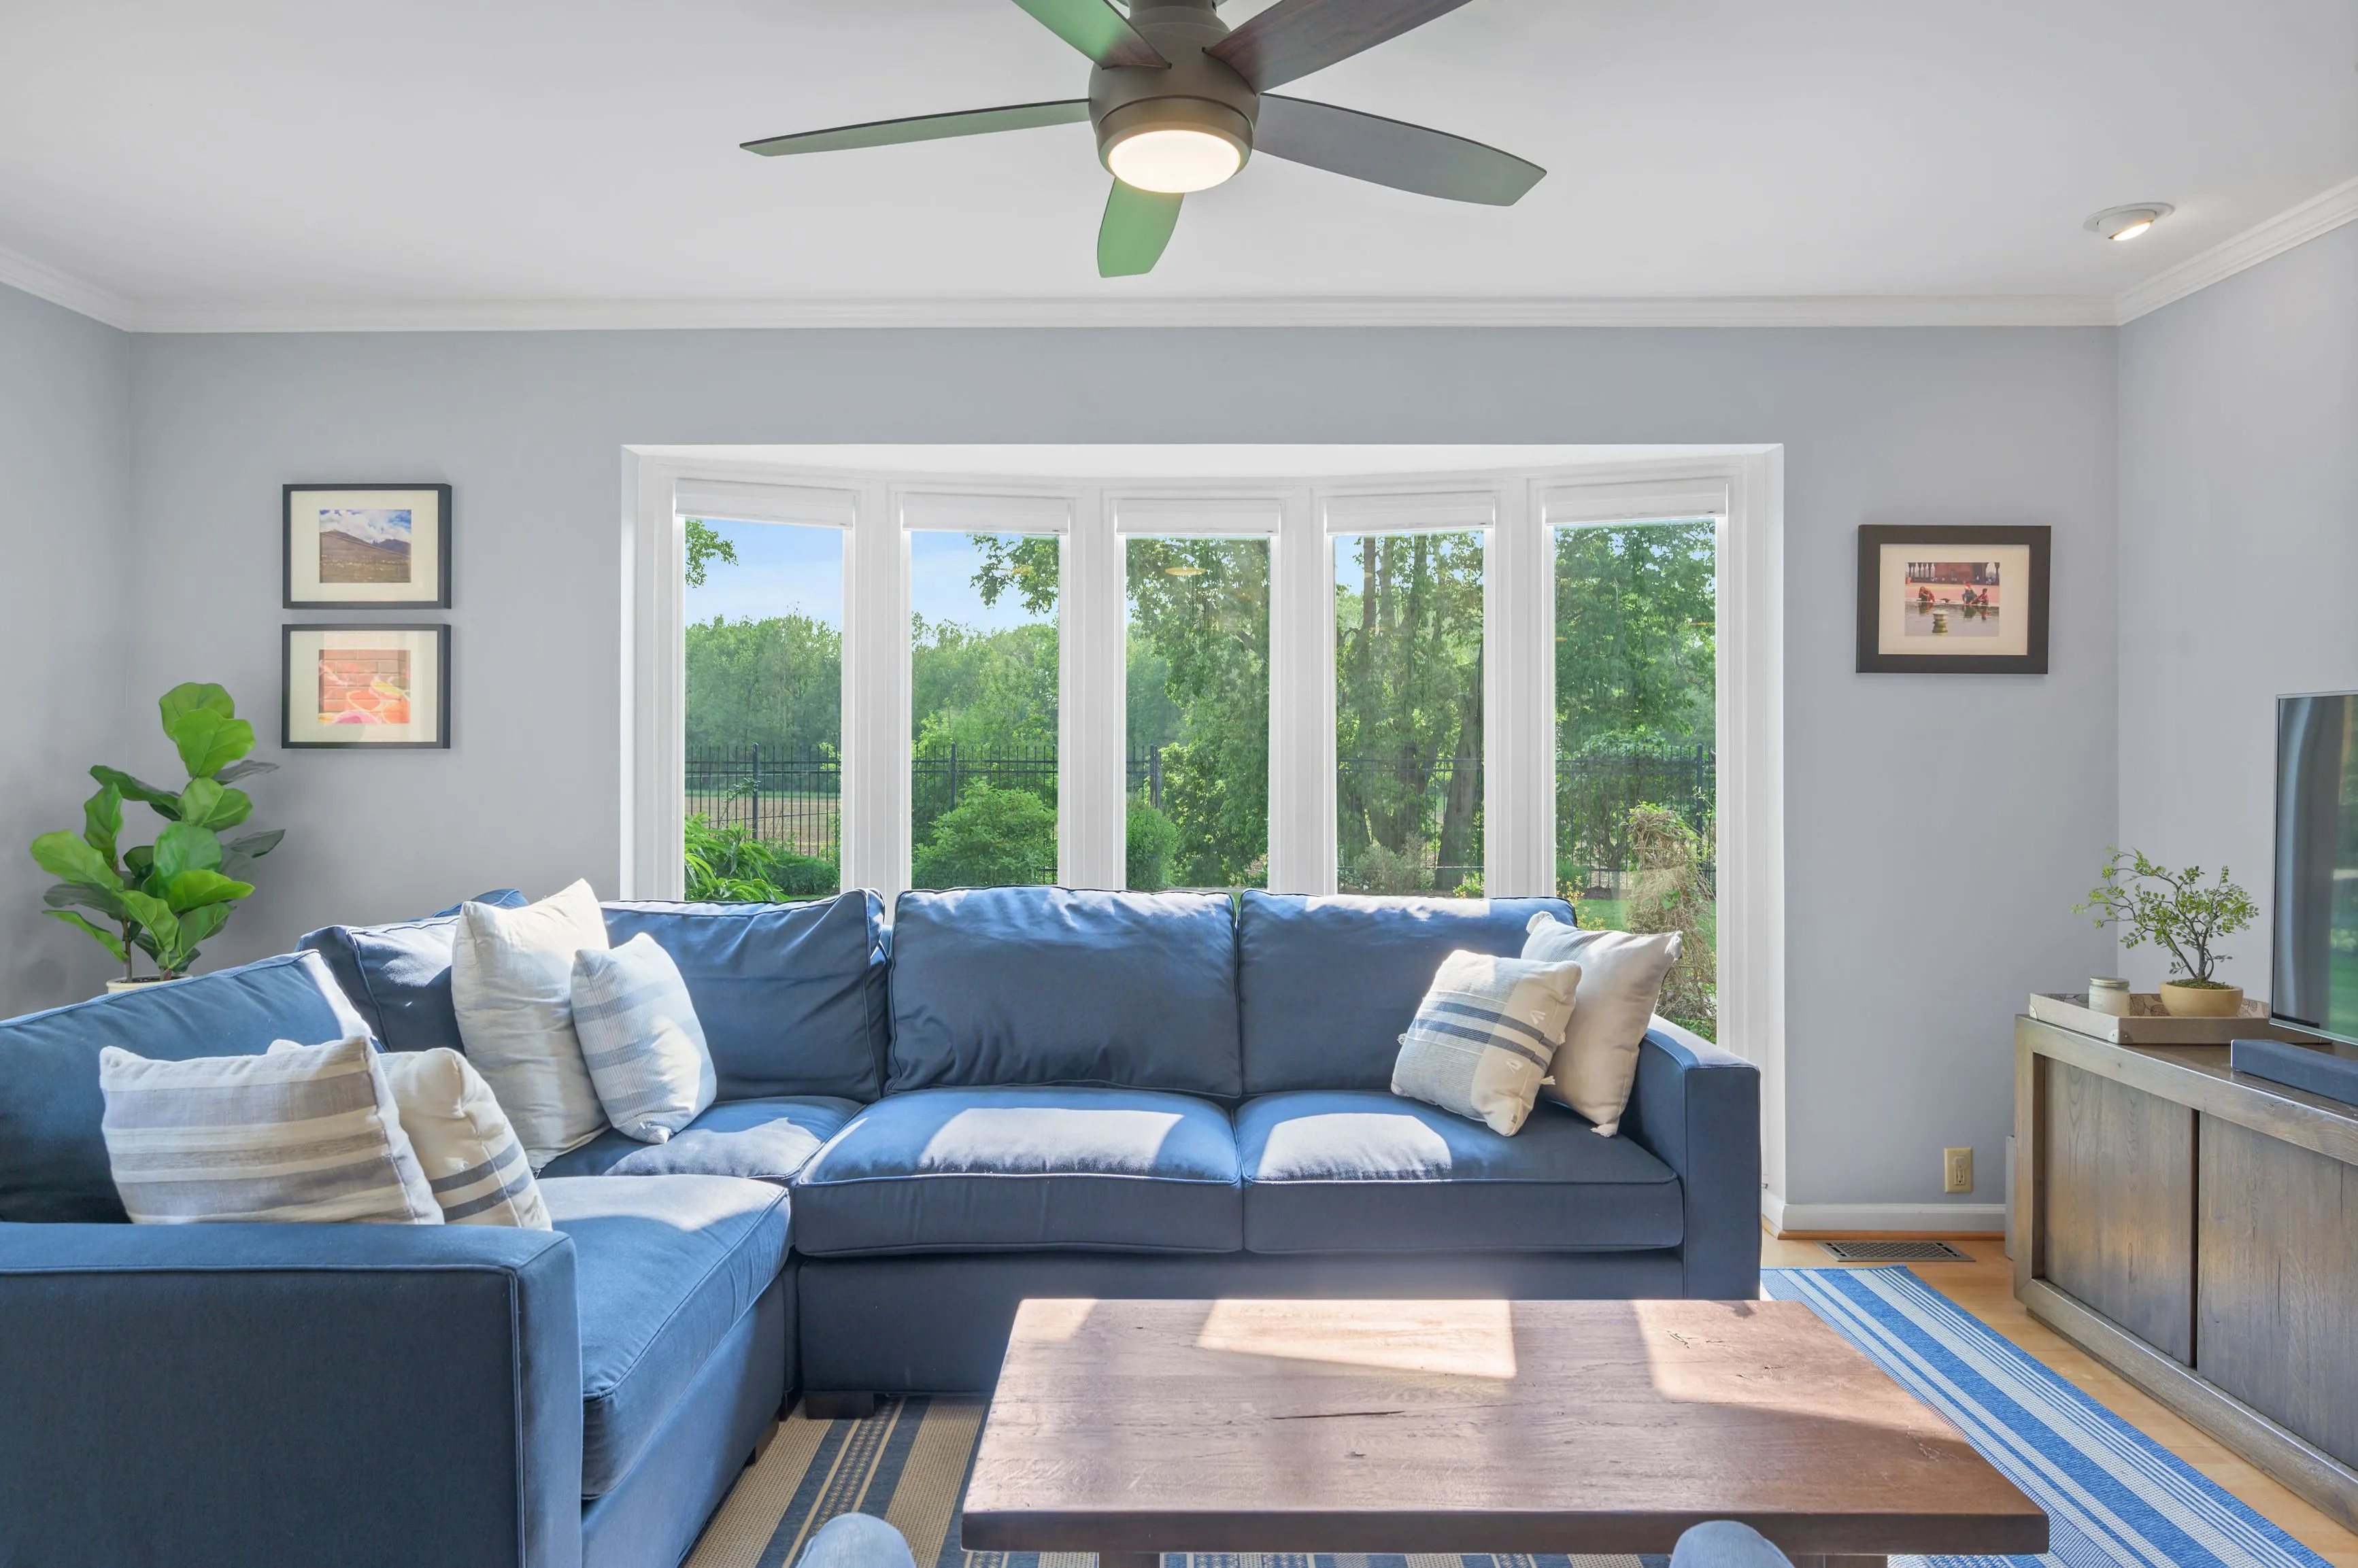 Bright living room with a blue sectional sofa, wooden coffee table, large windows, and a ceiling fan.